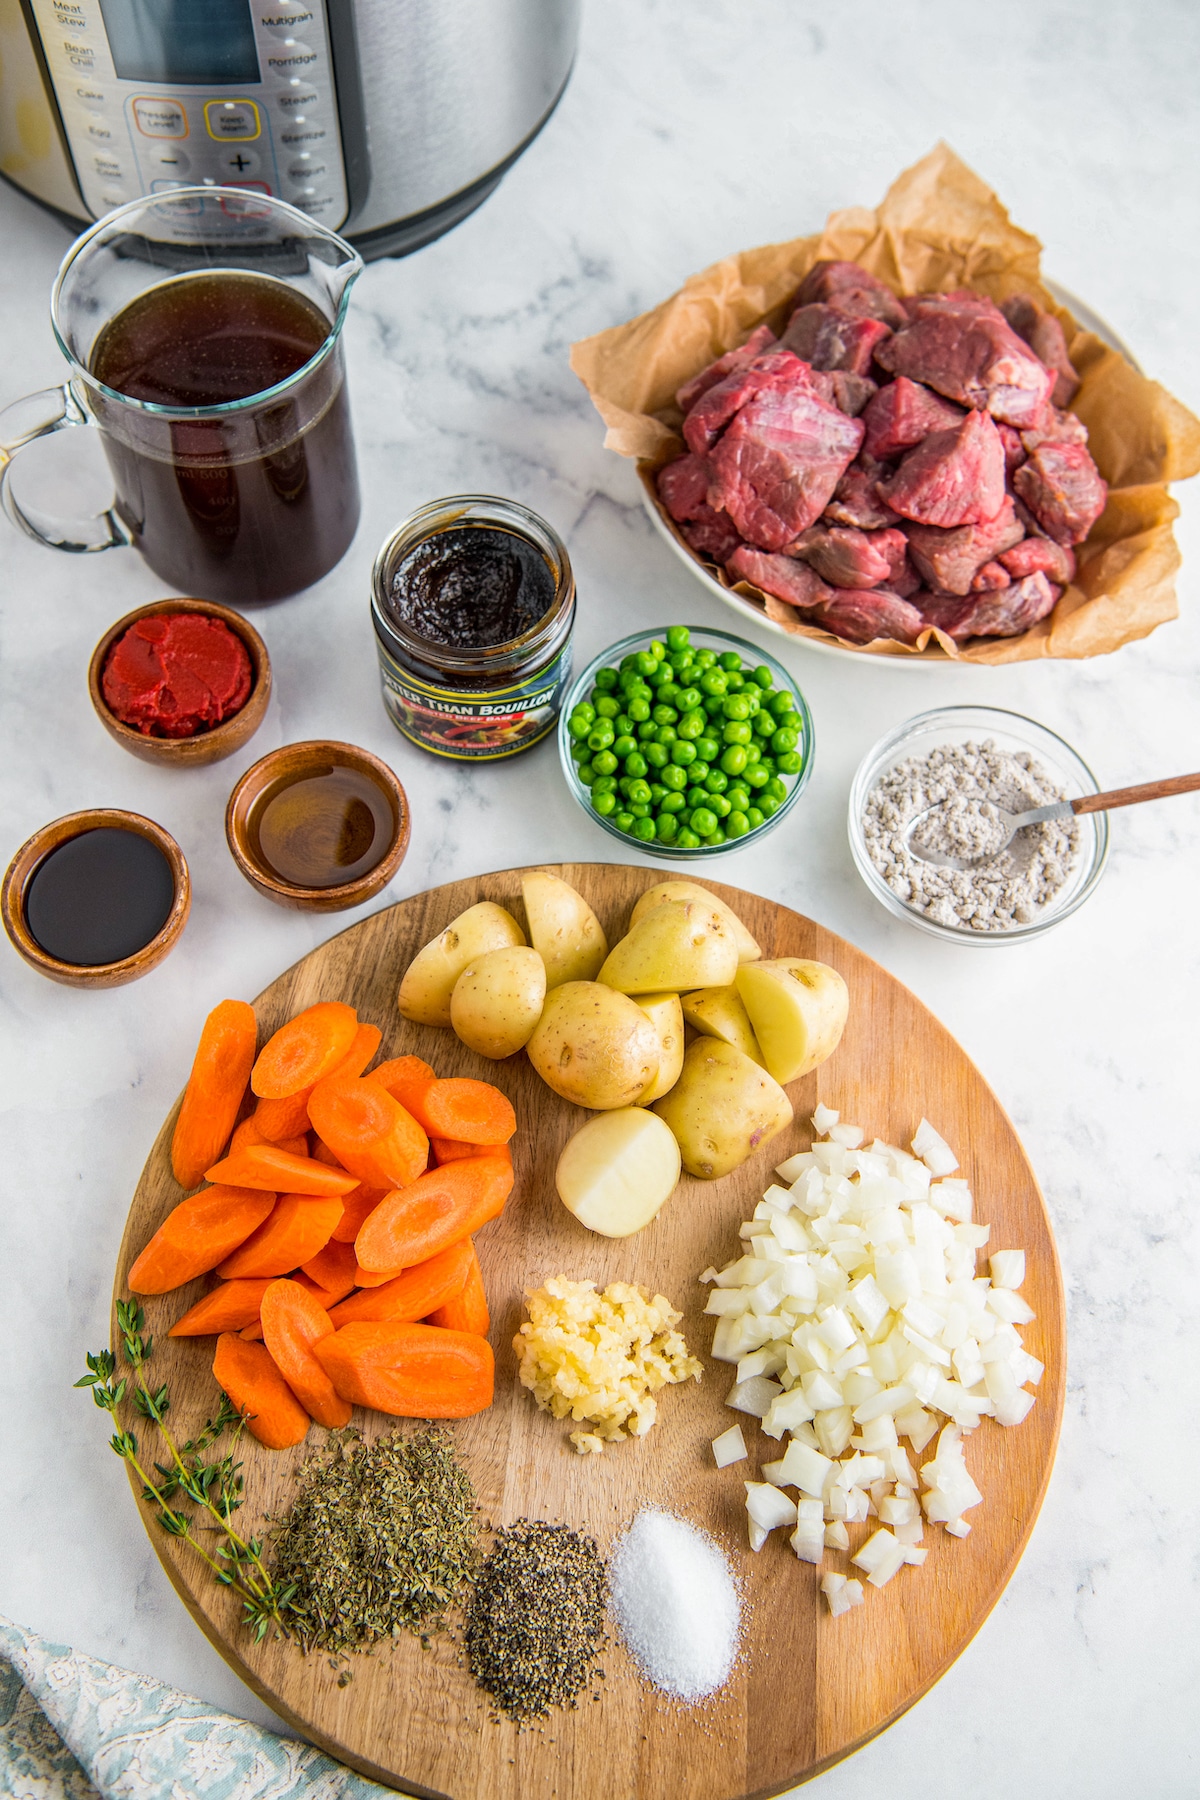 This easy Instant Pot Beef Stew is filled with hearty, tender beef, potatoes, carrots, and peas in a rich gravy to create a bowl of comfort! If you’re craving stew, but don’t have a lot of time, this pressure cooker recipe yields tender, delicious stew in a fraction of the time.